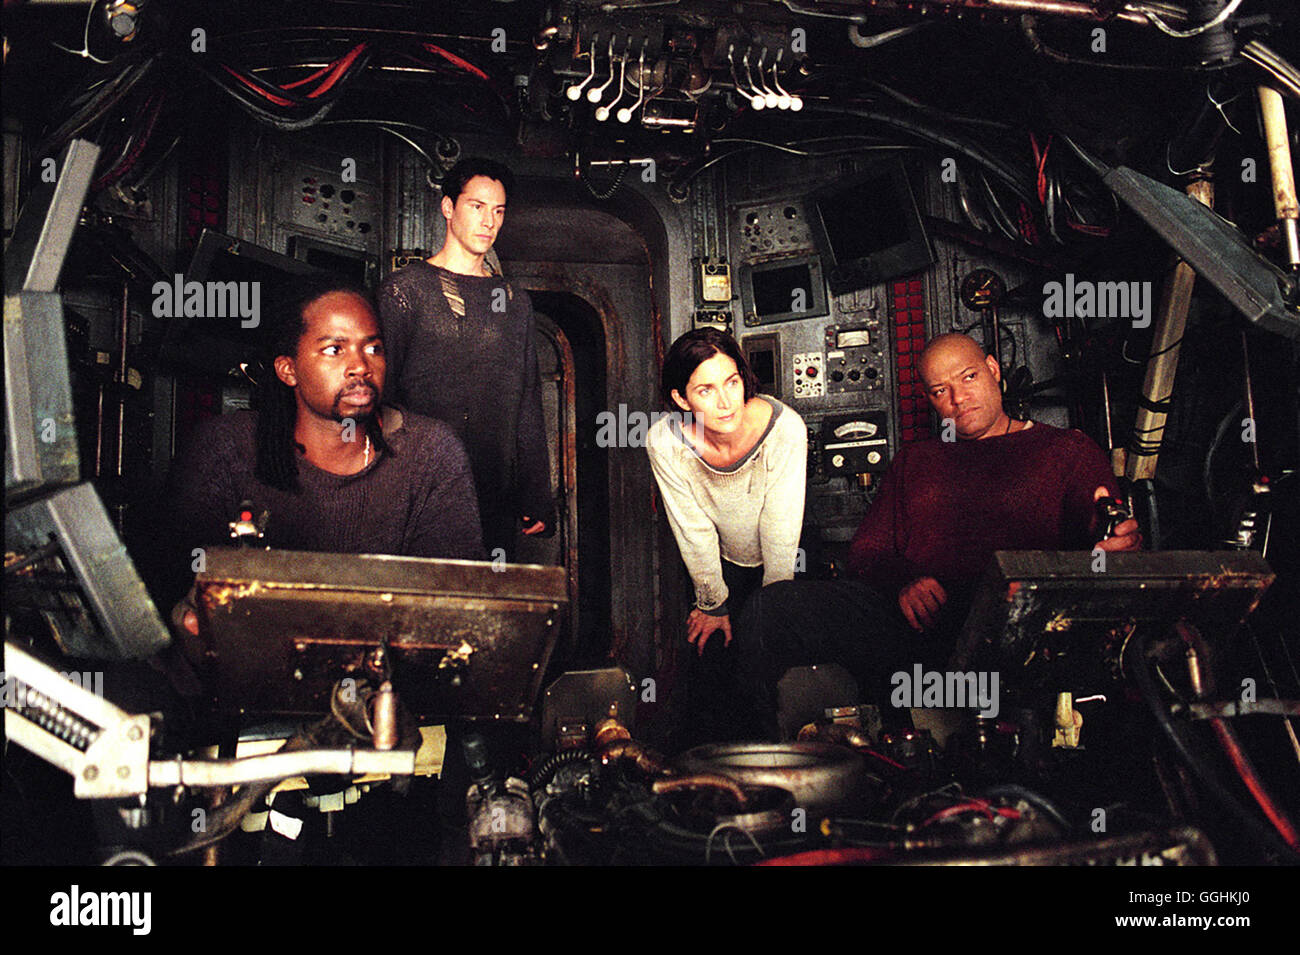 MATRIX - RELOADED / Matrix Reloaded USA 2002 / Larry & Andy Wachowski Kain (HAROLD PERRINEAU), Neo (KEANU REEVES), Trinity (CARRIE-ANNE MOSS), Morpheus (LAWRENCE FISHBURNE) Regie: Larry & Andy Wachowski aka. Matrix Reloaded Stock Photo